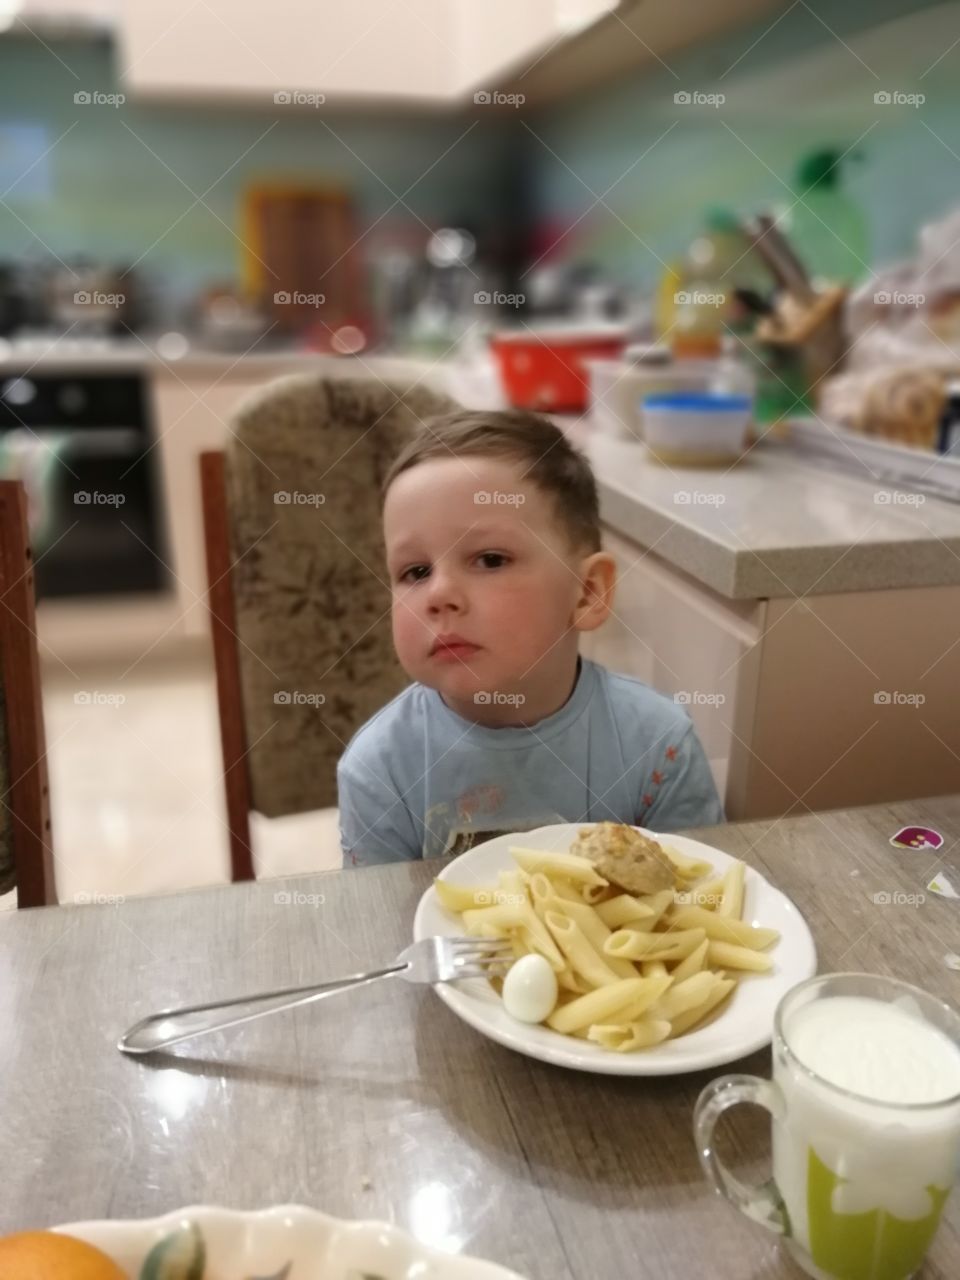 Boy eating egg, spaghetti and meat